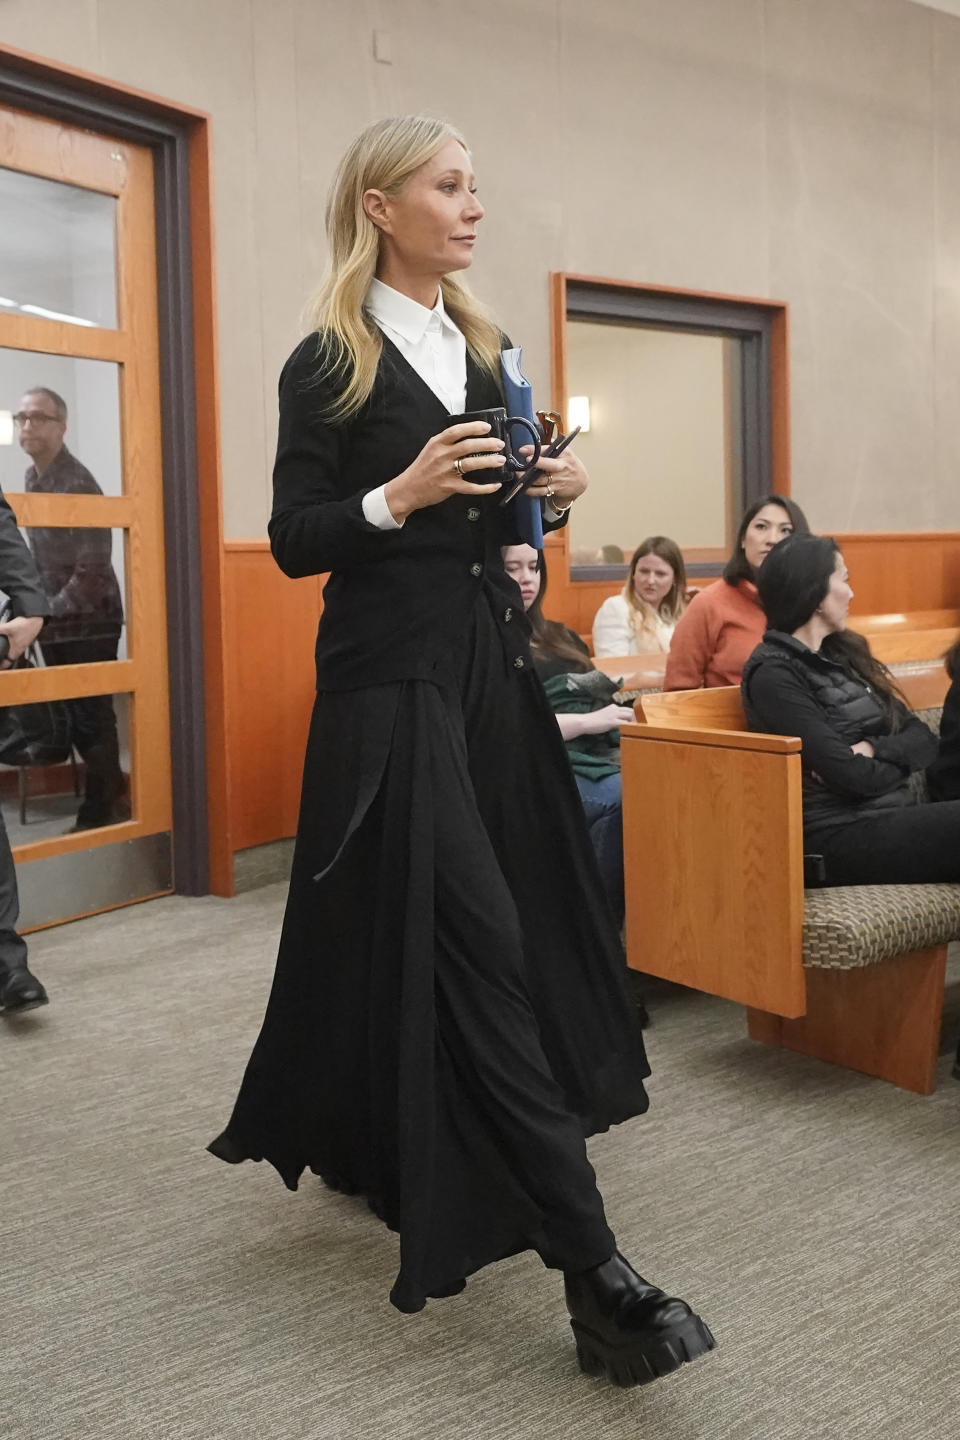 FILE - Gwyneth Paltrow enters the courtroom for her trial on March 27, 2023, in Park City, Utah. Paltrow's live-streamed trial over a 2016 collision at a posh Utah ski resort has drawn worldwide attention, spawning memes and sparking debate about the burden and power of celebrity. (AP Photo/Rick Bowmer, Pool, File)